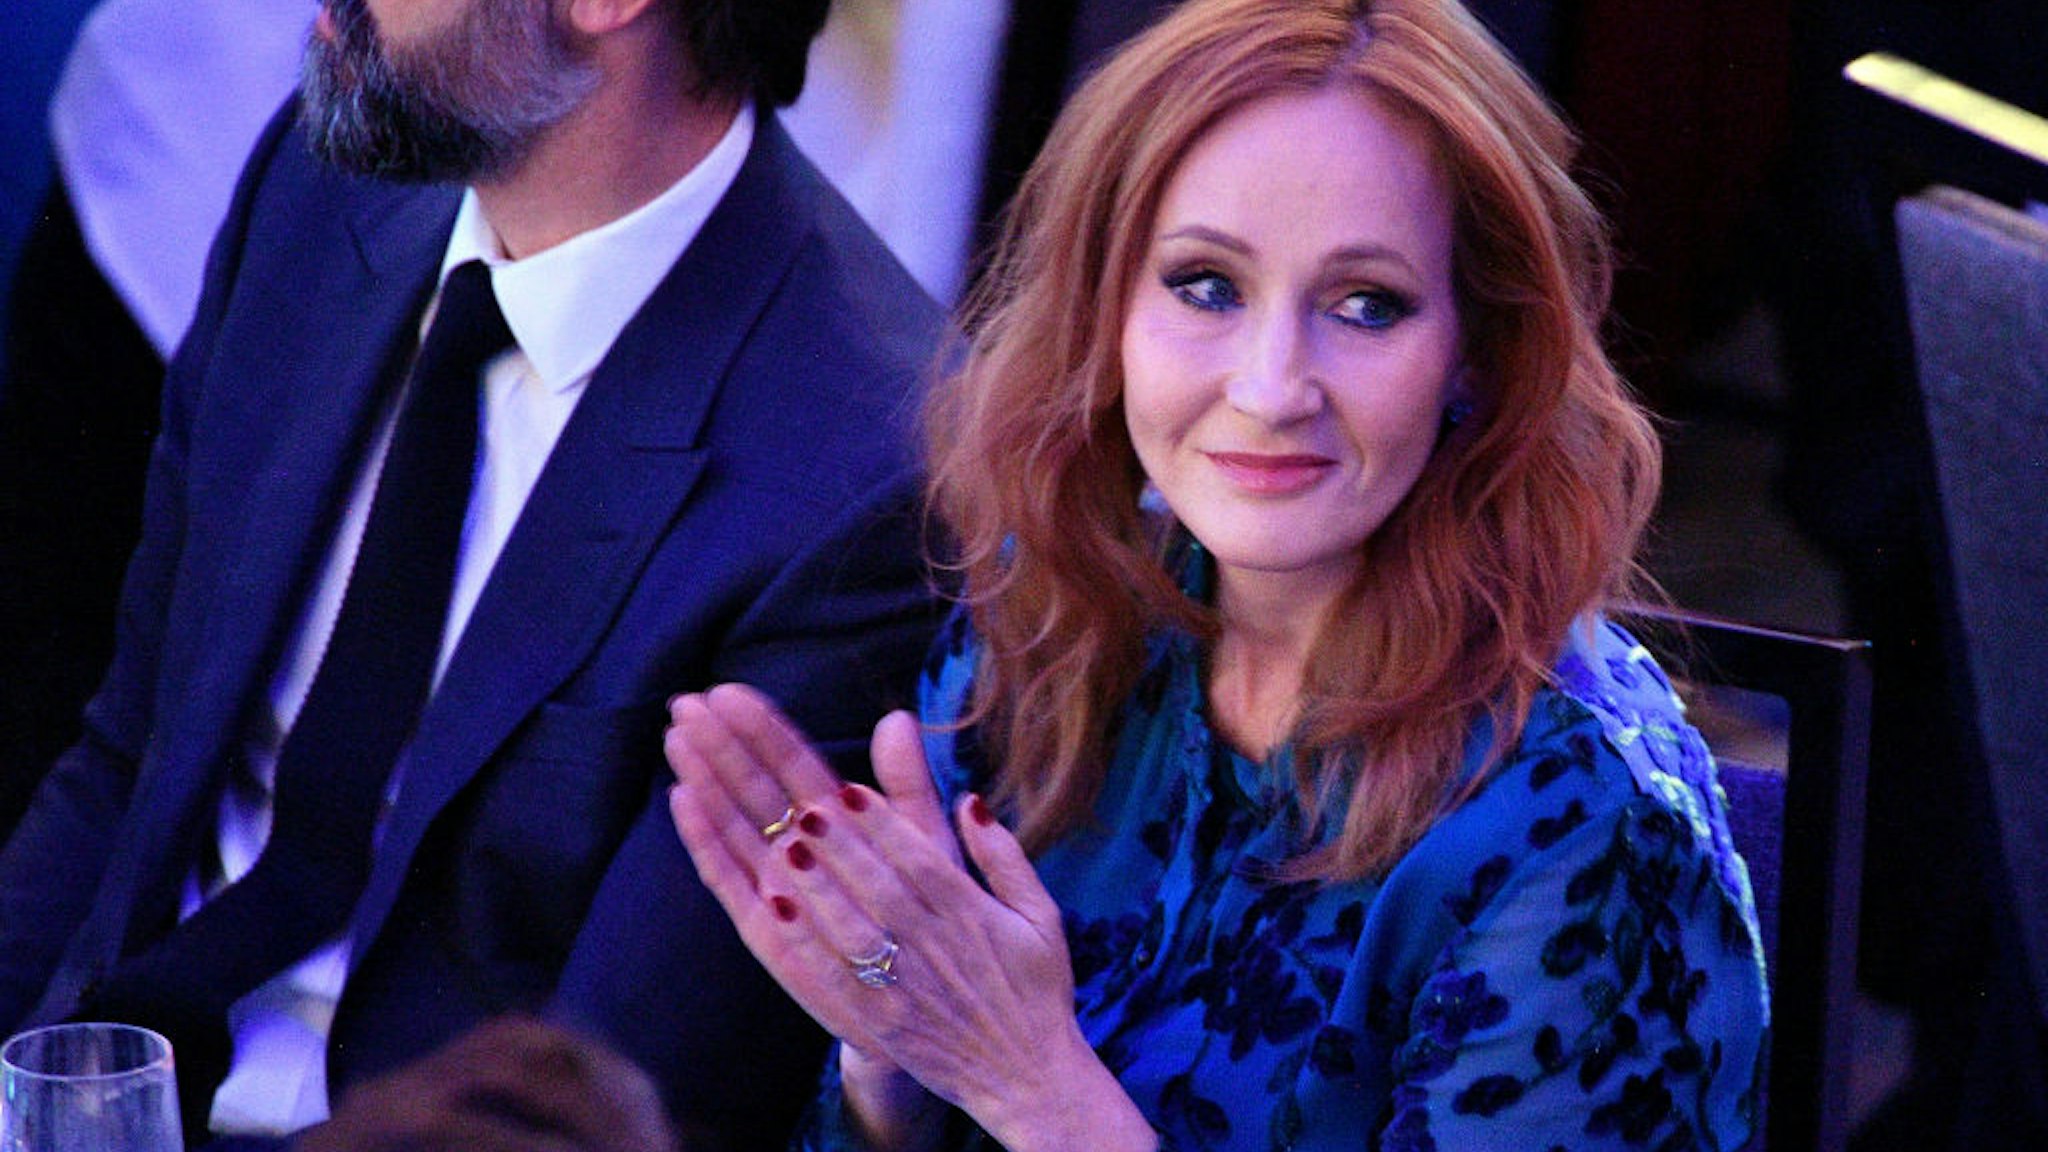 NEW YORK, NEW YORK - DECEMBER 12: J.K. Rowling arrives at the 2019 RFK Ripple of Hope Awards at New York Hilton Midtown on December 12, 2019 in New York City. (Photo by Dia Dipasupil/Getty Images)